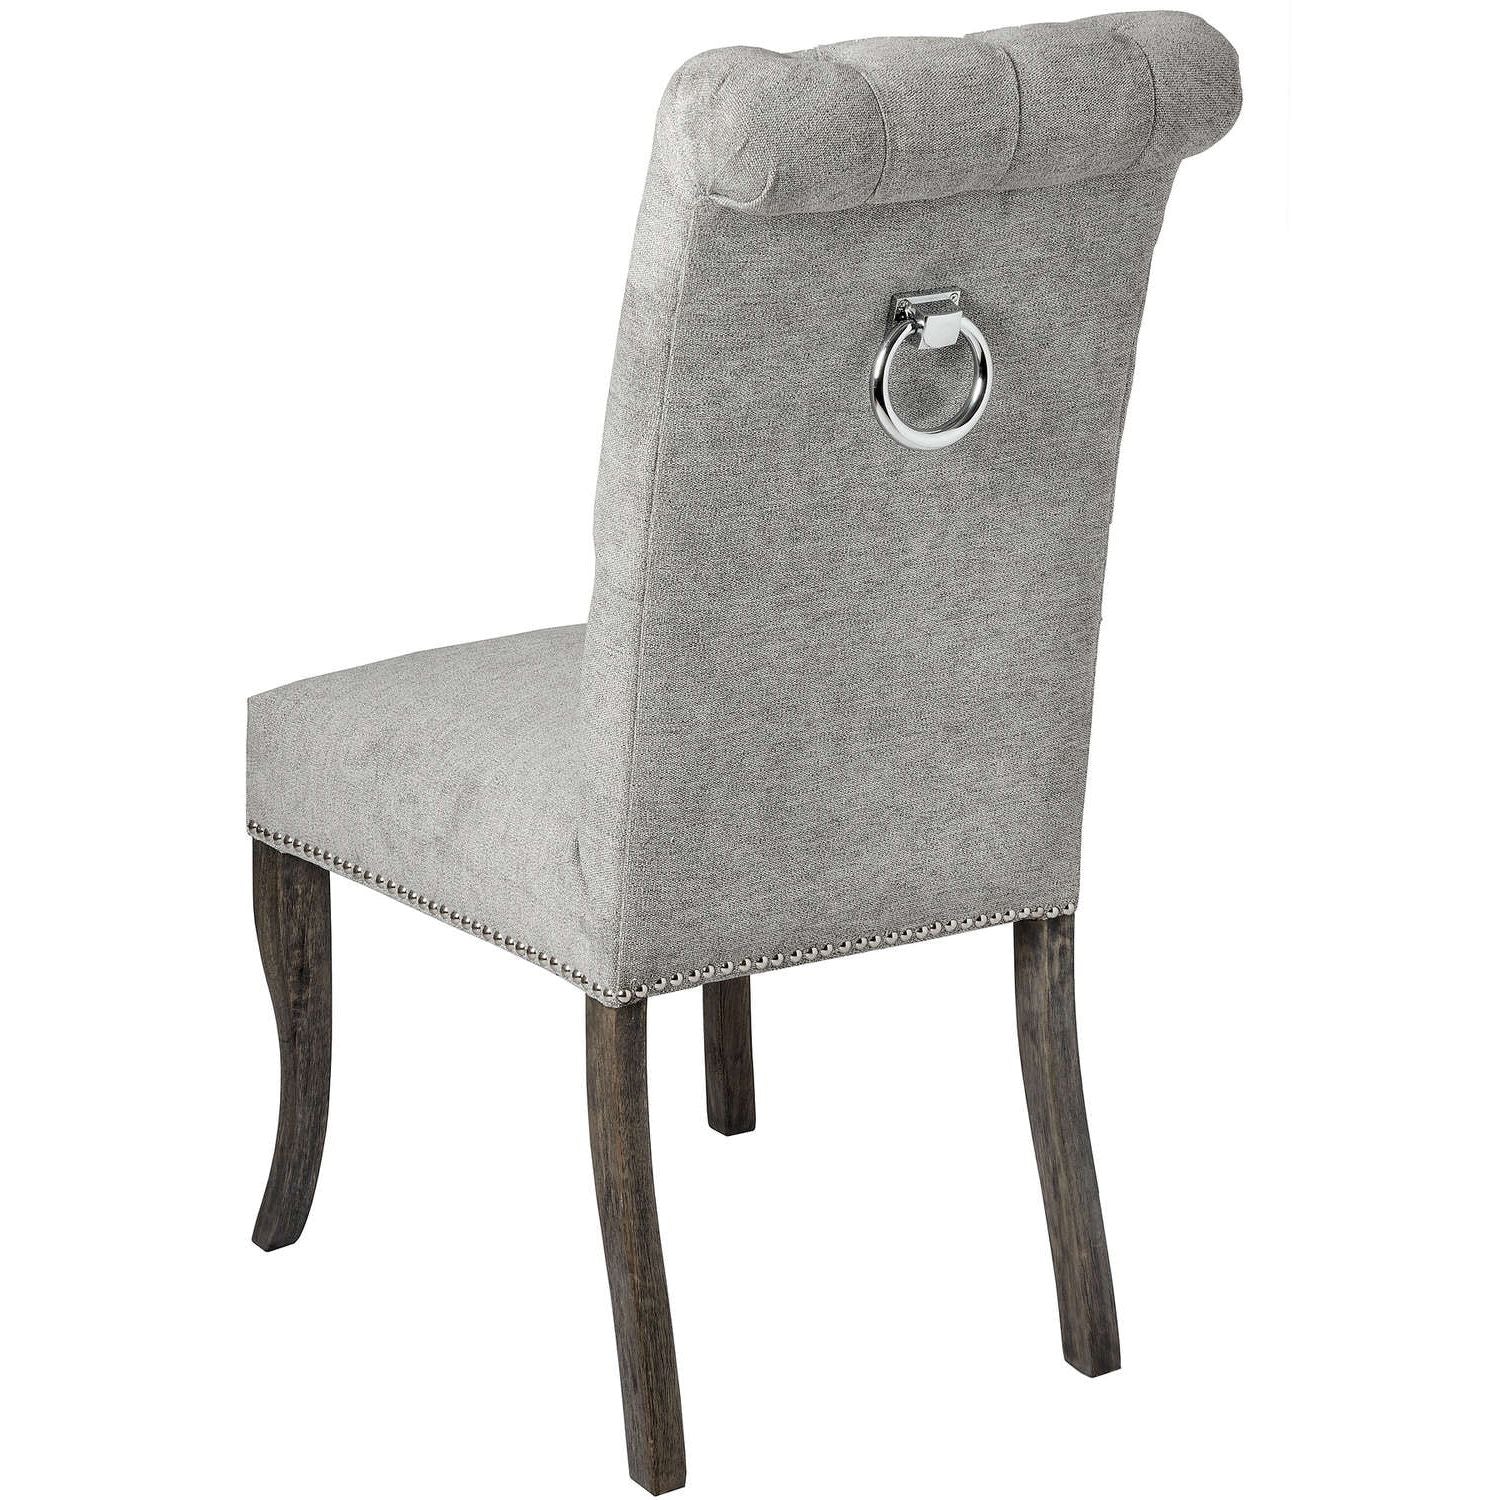 Silver roll top dining chair with ring pull